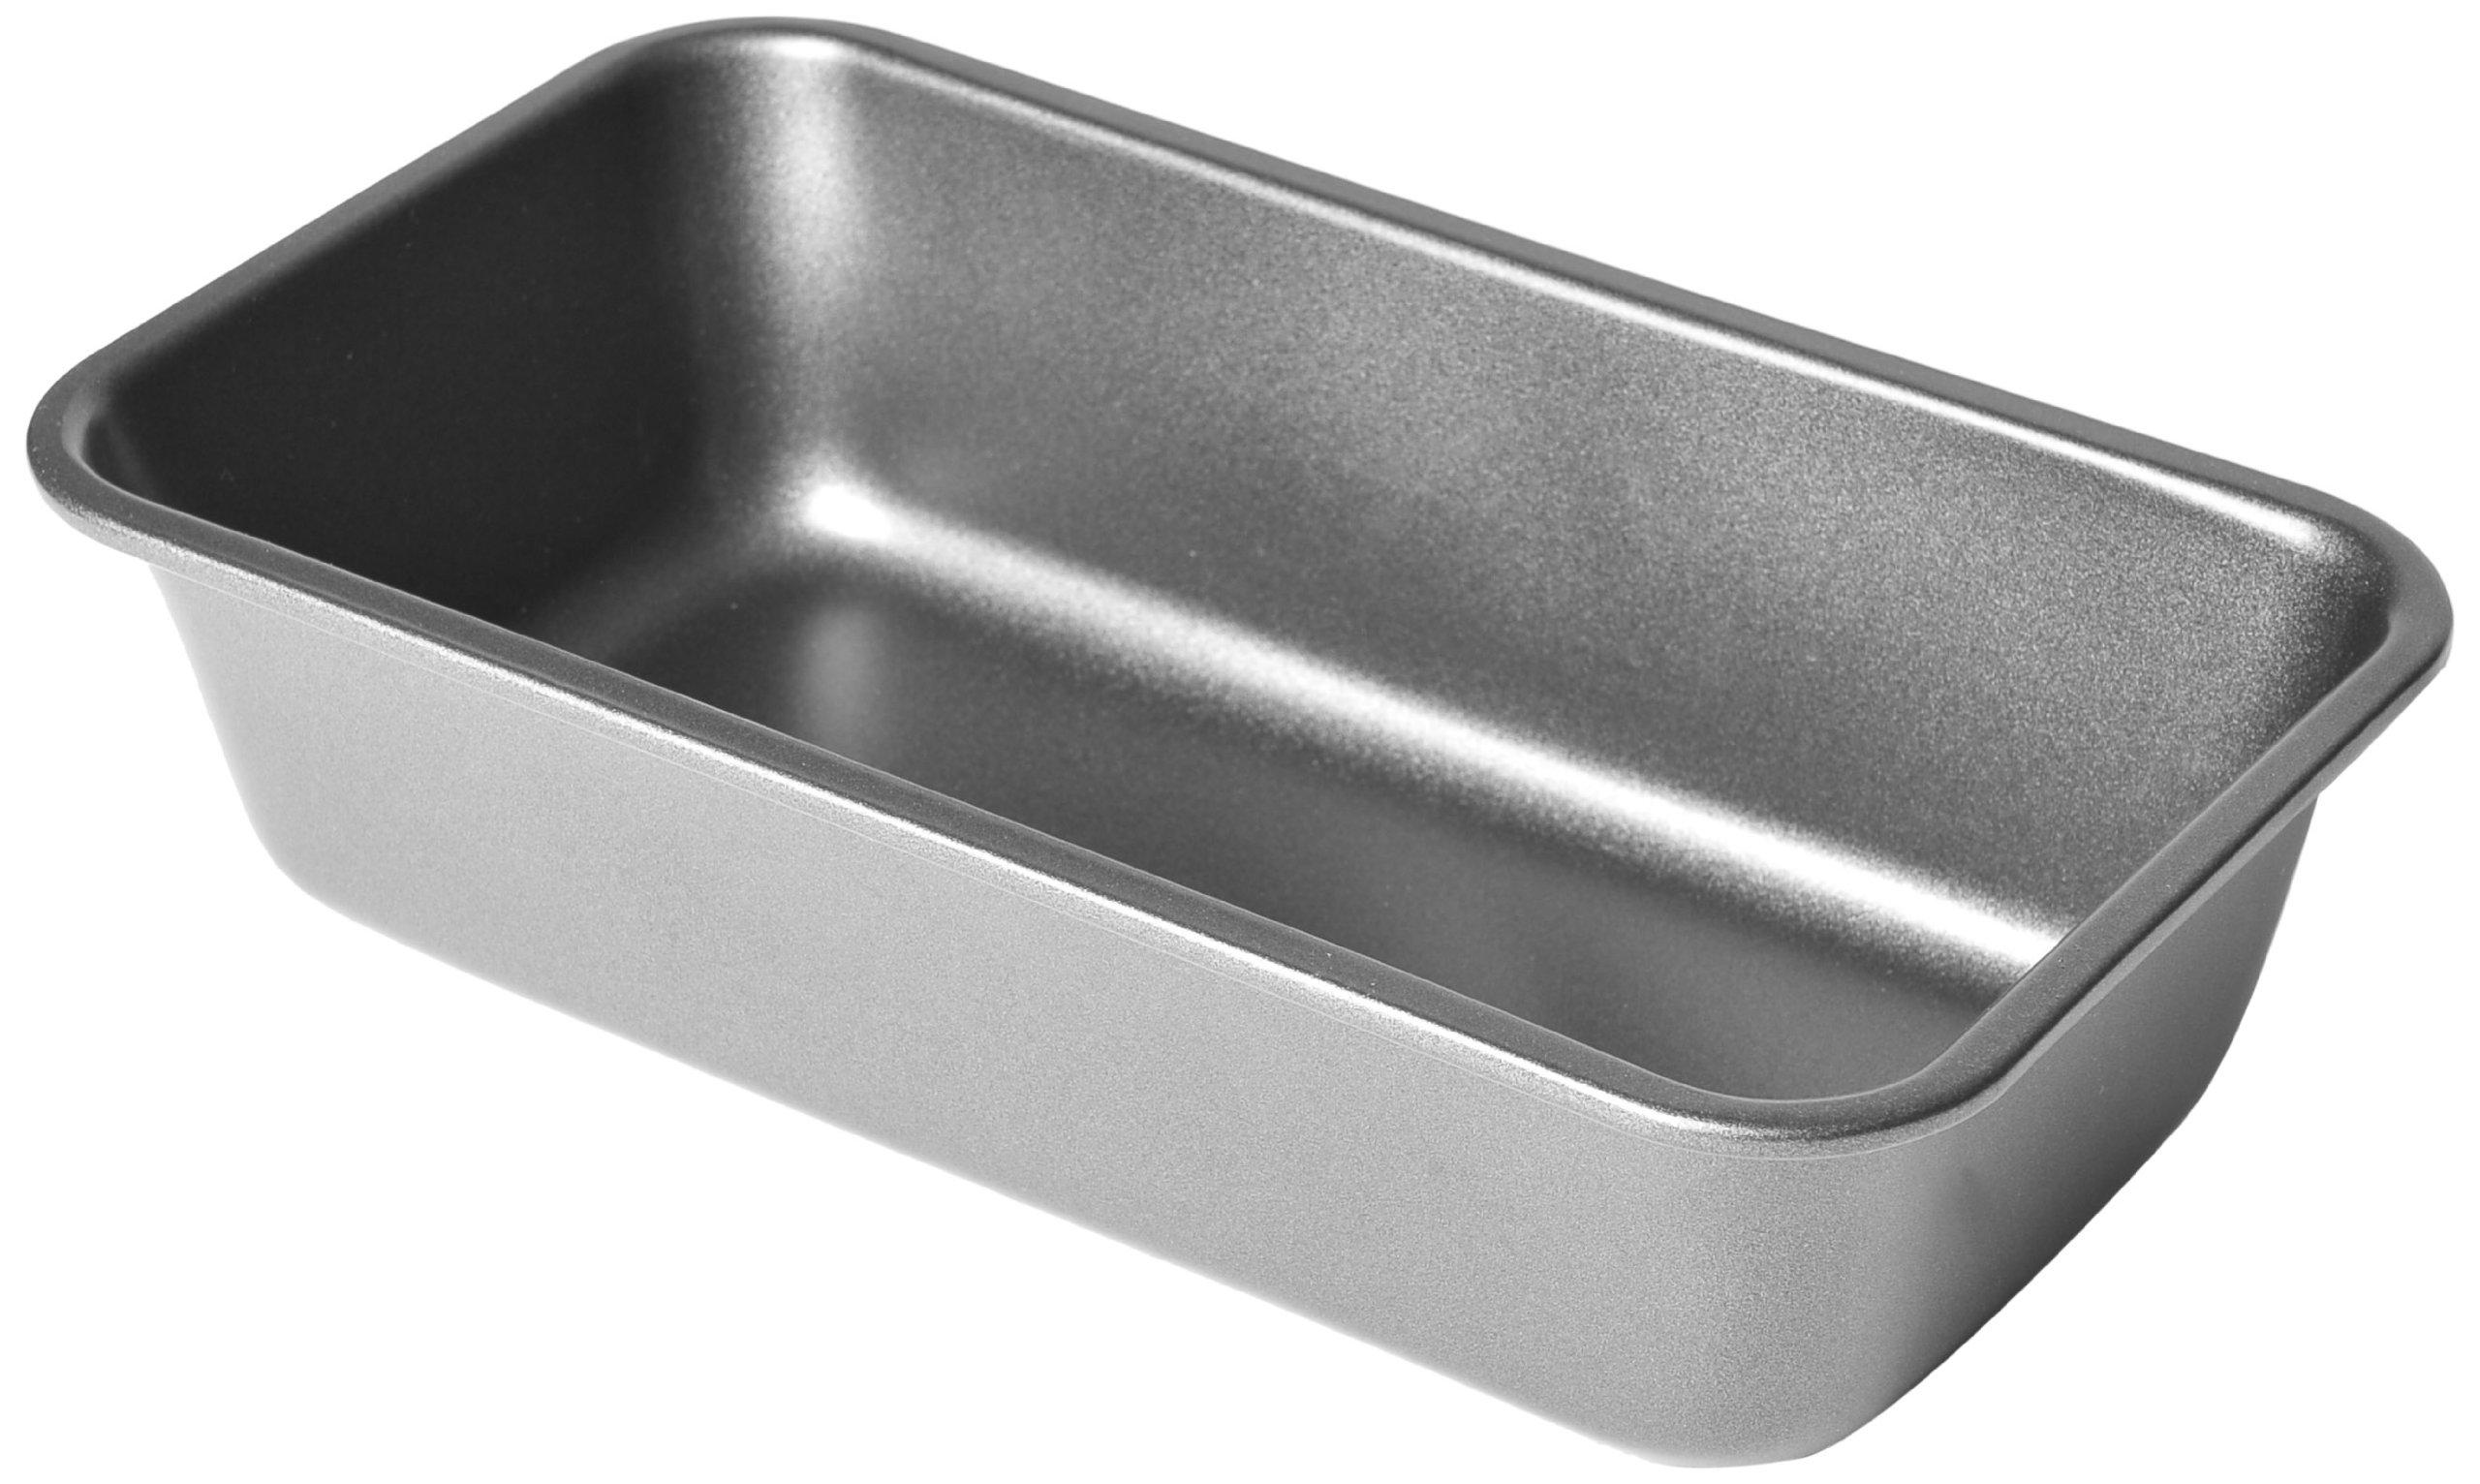 MDC Housewares Inc. chloe's kitchen loaf pan, 5-inch by 9-inch, non-stick